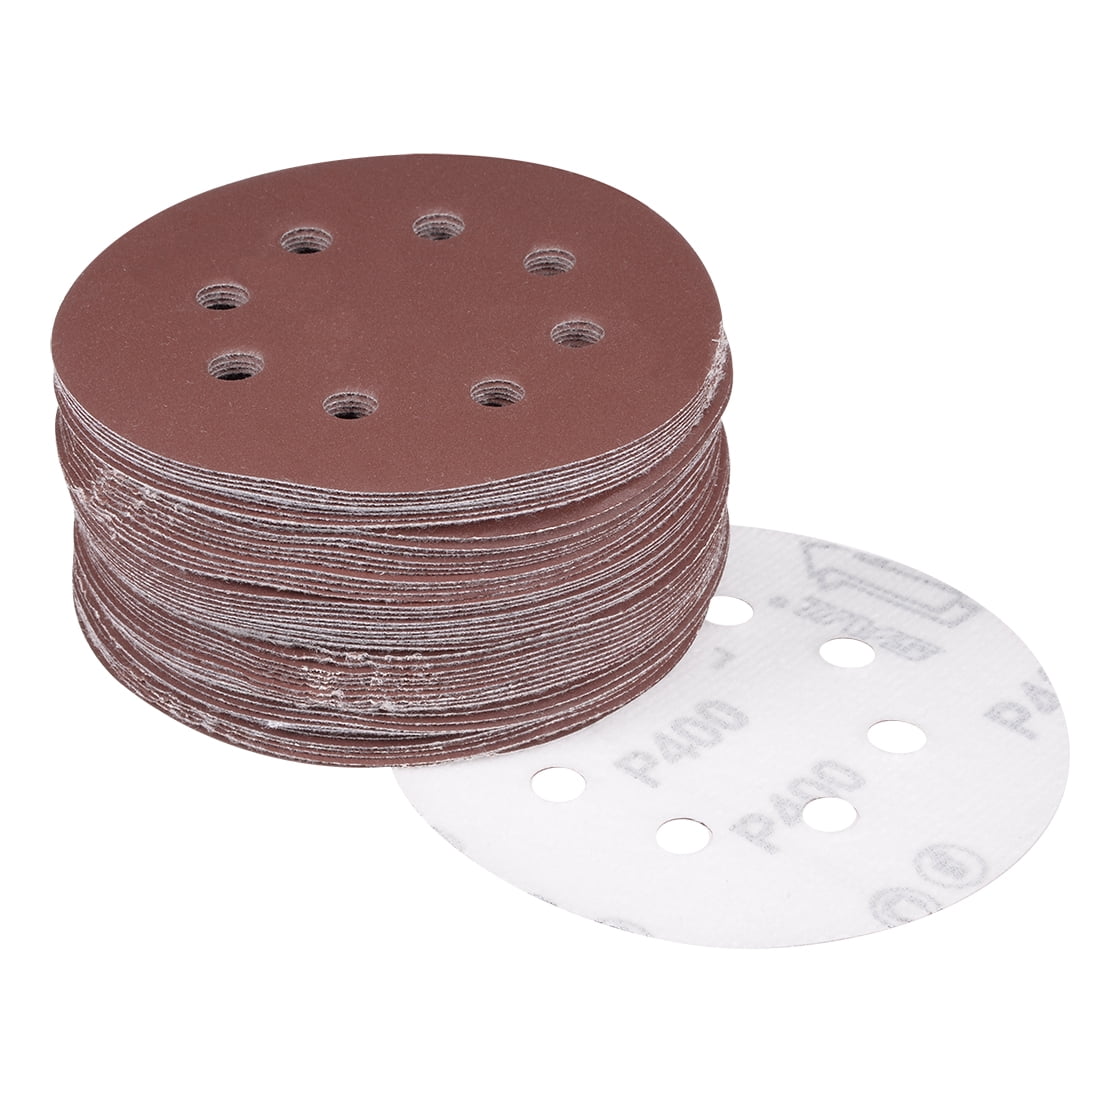 3 Inch Assorted Grits White Dry & Waterproof Ltd Hook & Loop Sanding Discs with 1/4 inch Shank Sanding Pad wet/dry Soft Foam-Backed Interface Buffer Pad Total 100 Discs Jinhua Puxian e-commerce Co